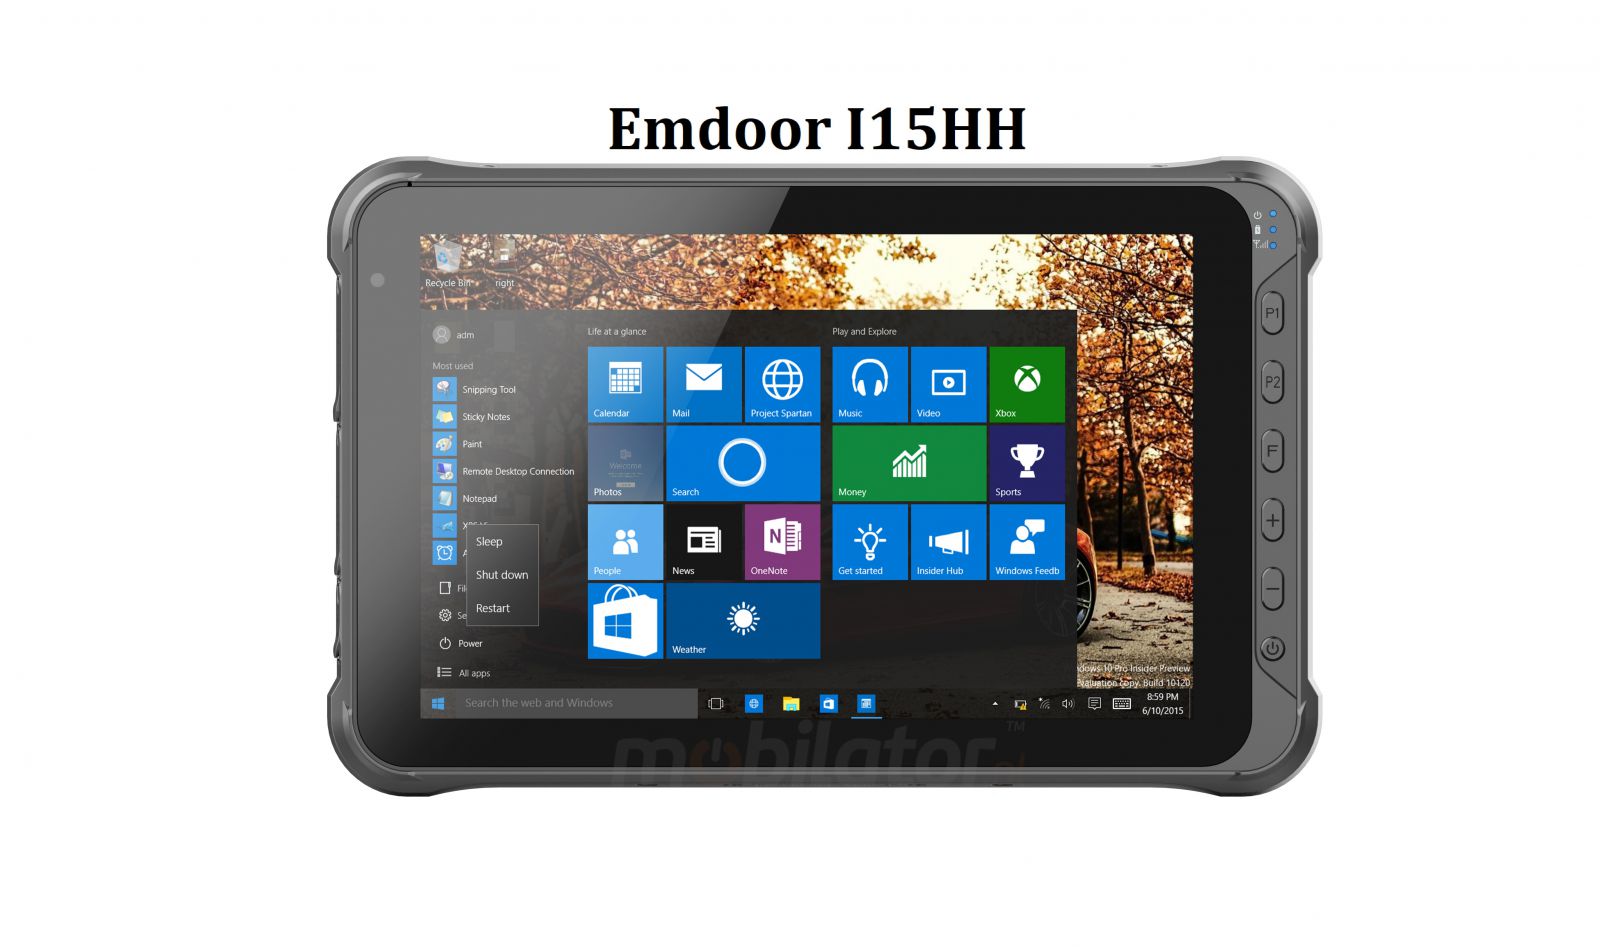 Emdoor I15HH v.5 - Multitasking 10-inch tablet with Bluetooth 4.2, 4G, 4GB RAM memory, 64GB disk, 1D Honeywell barcode reader and UHF RFID 